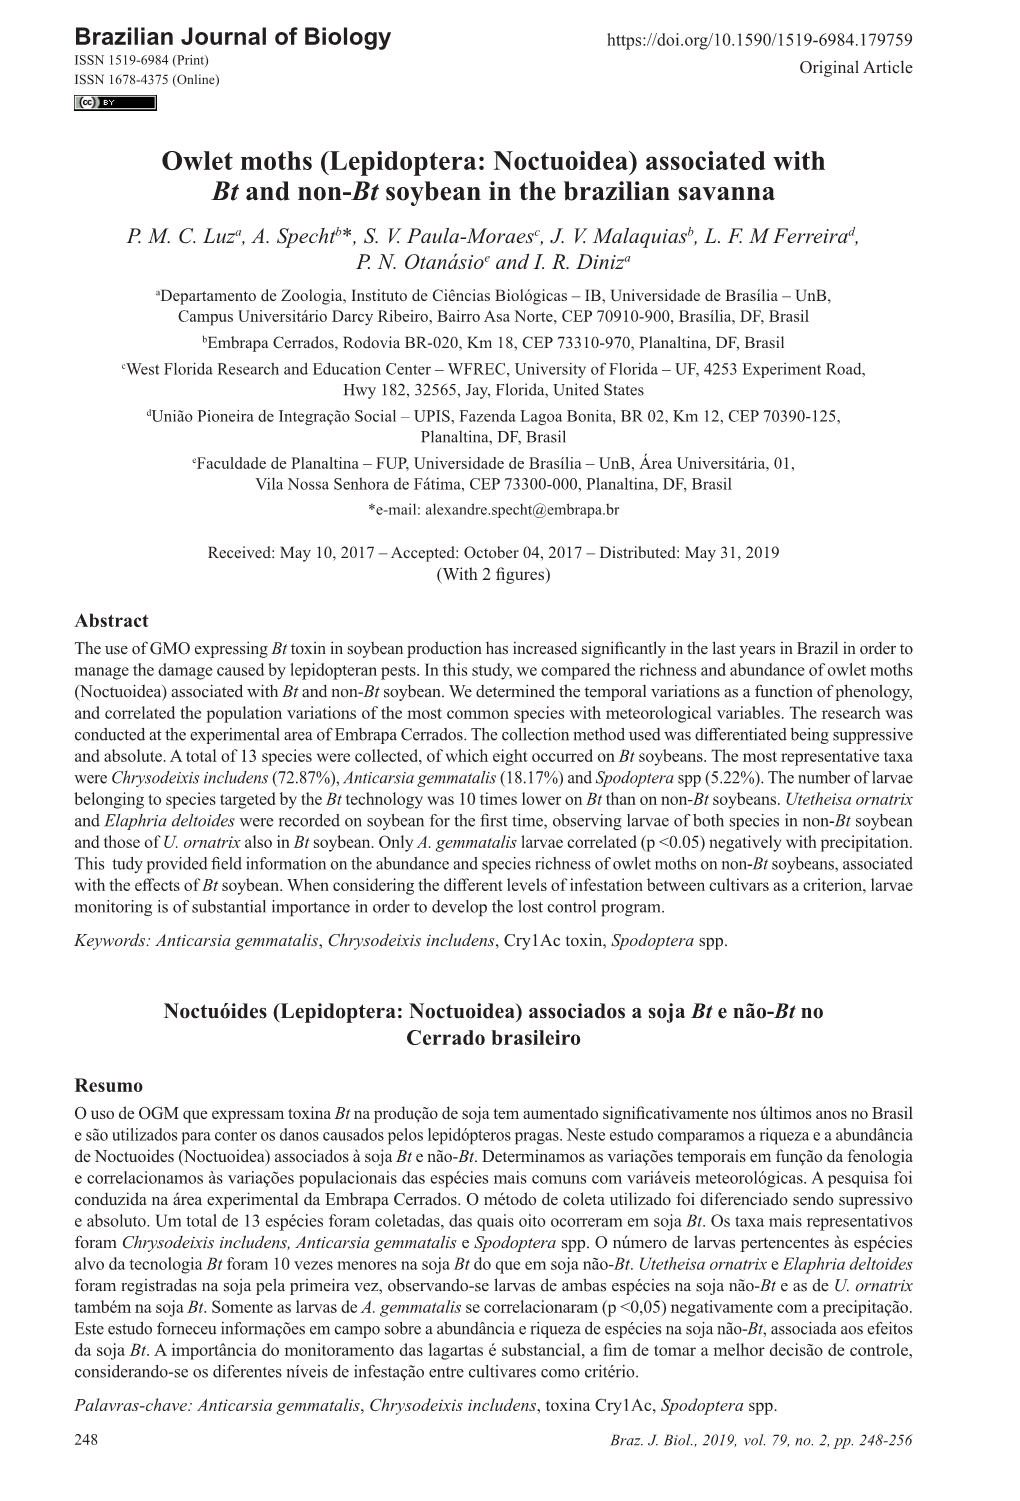 (Lepidoptera: Noctuoidea) Associated with Bt and Non-Bt Soybean in the Brazilian Savanna P